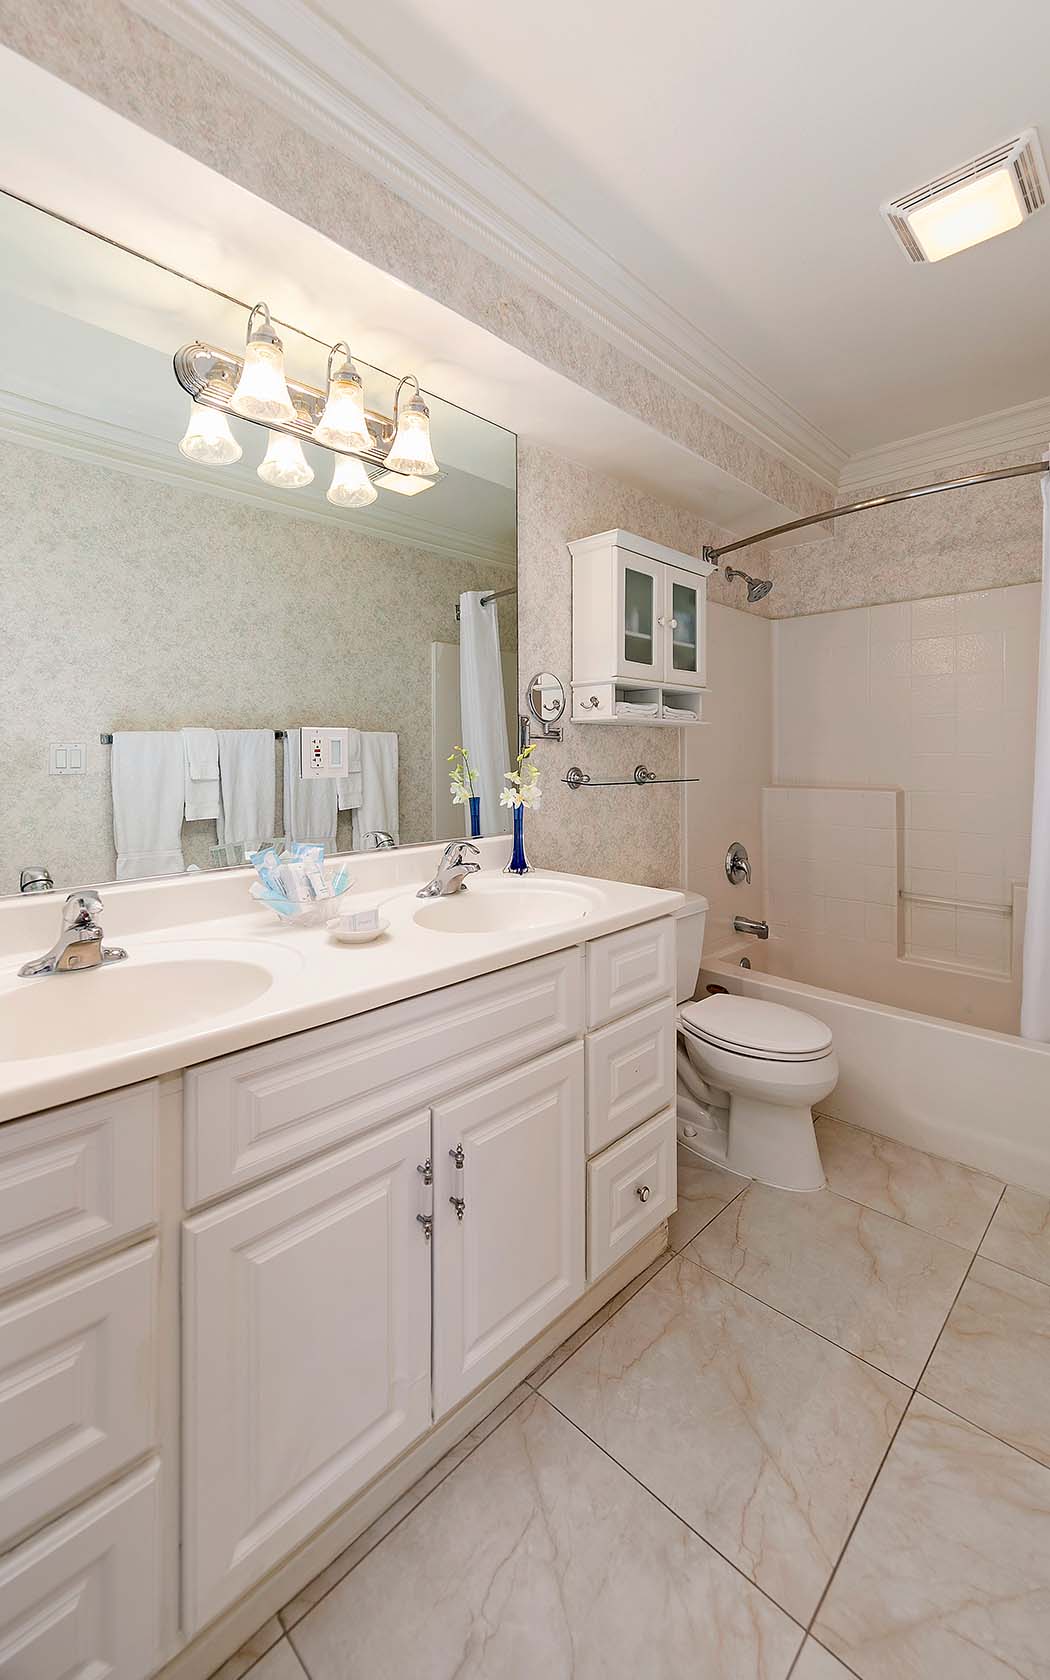 corner view of a spacious private bathroom in white accents 